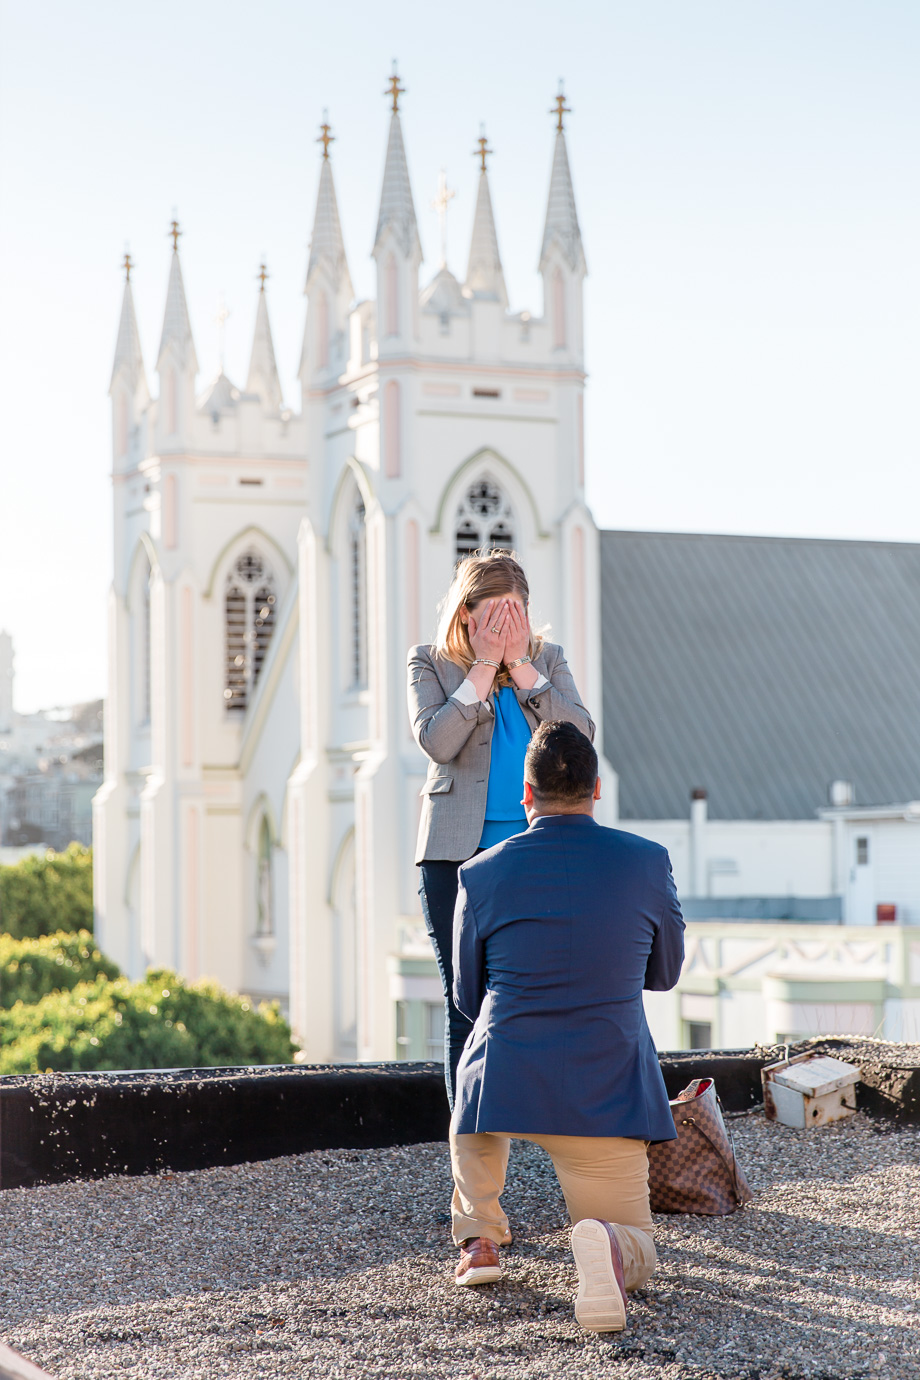 San Francisco rooftop surprise proposal photo in front of National Shrine of St Francis of Assisi church